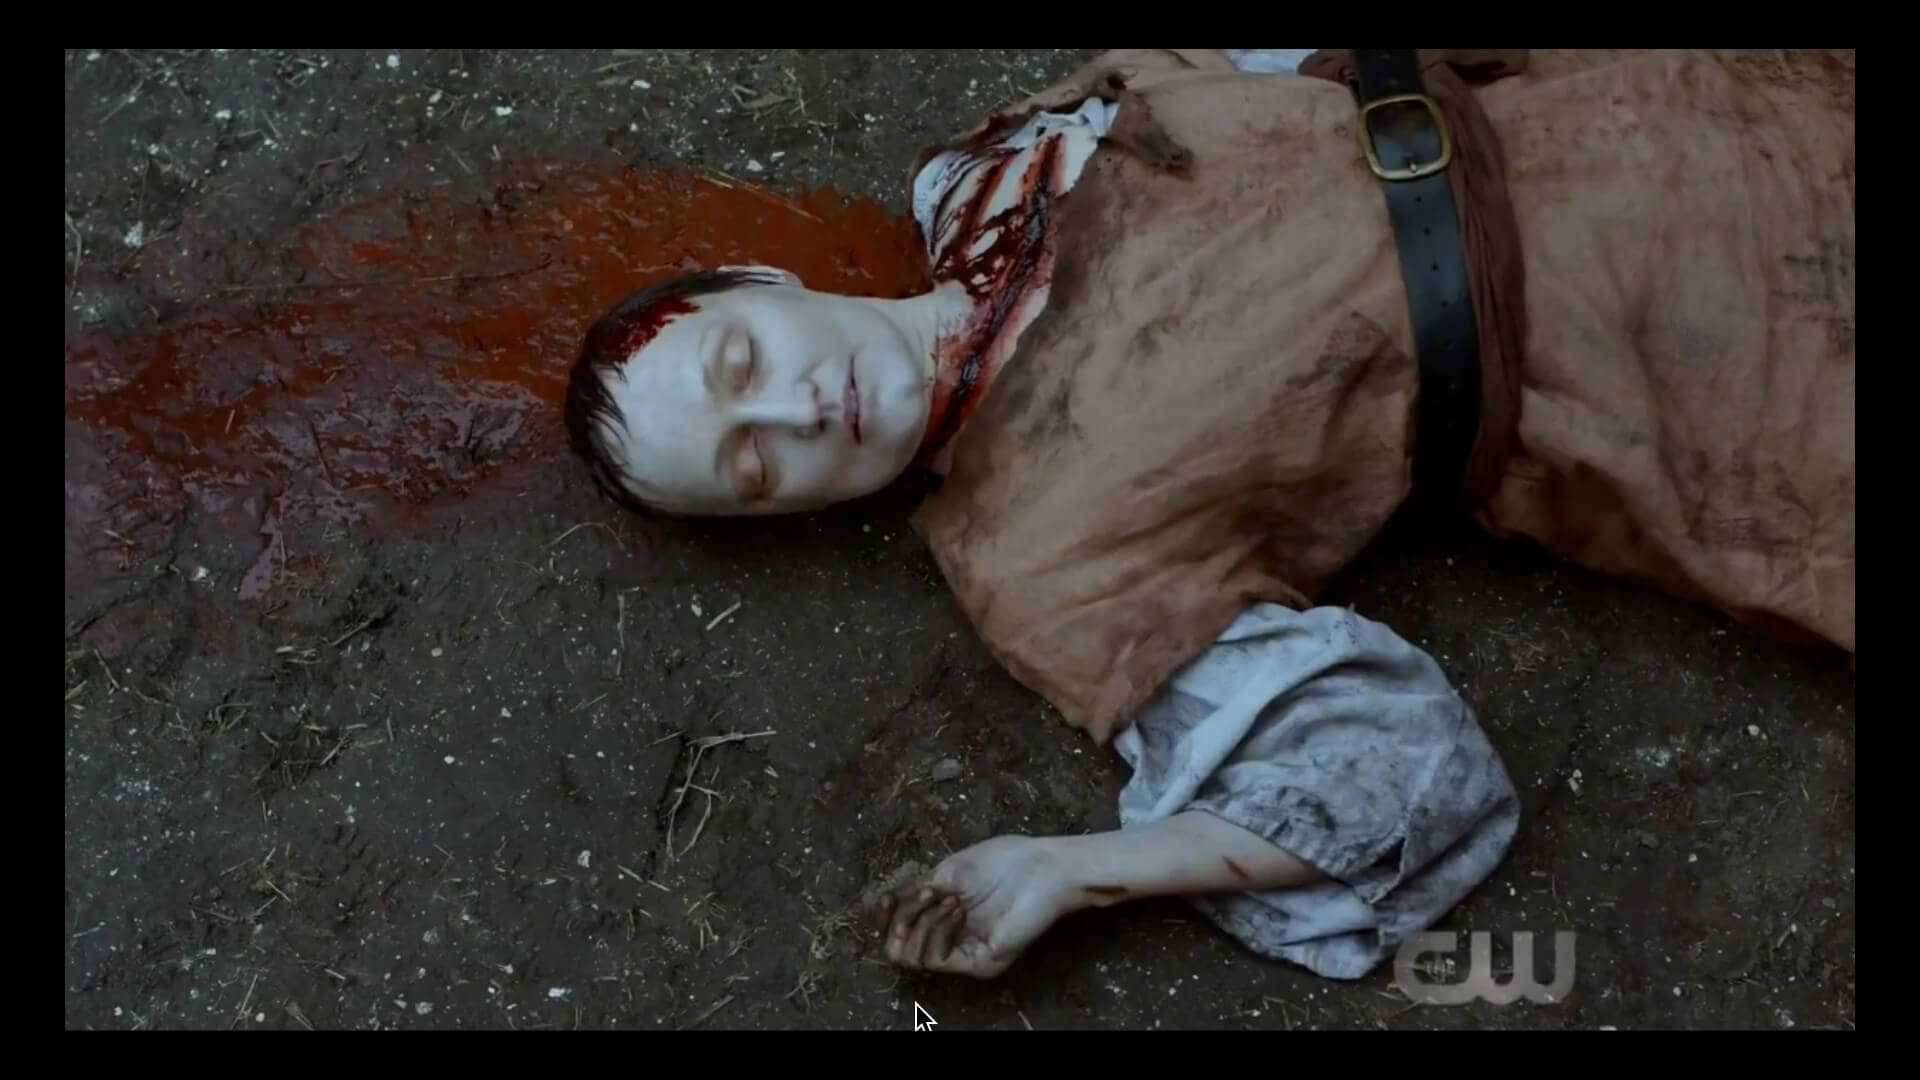 Still from The Outpost. Julie-Anne lies dead, brutally slashed in medieval/fantasy attire.